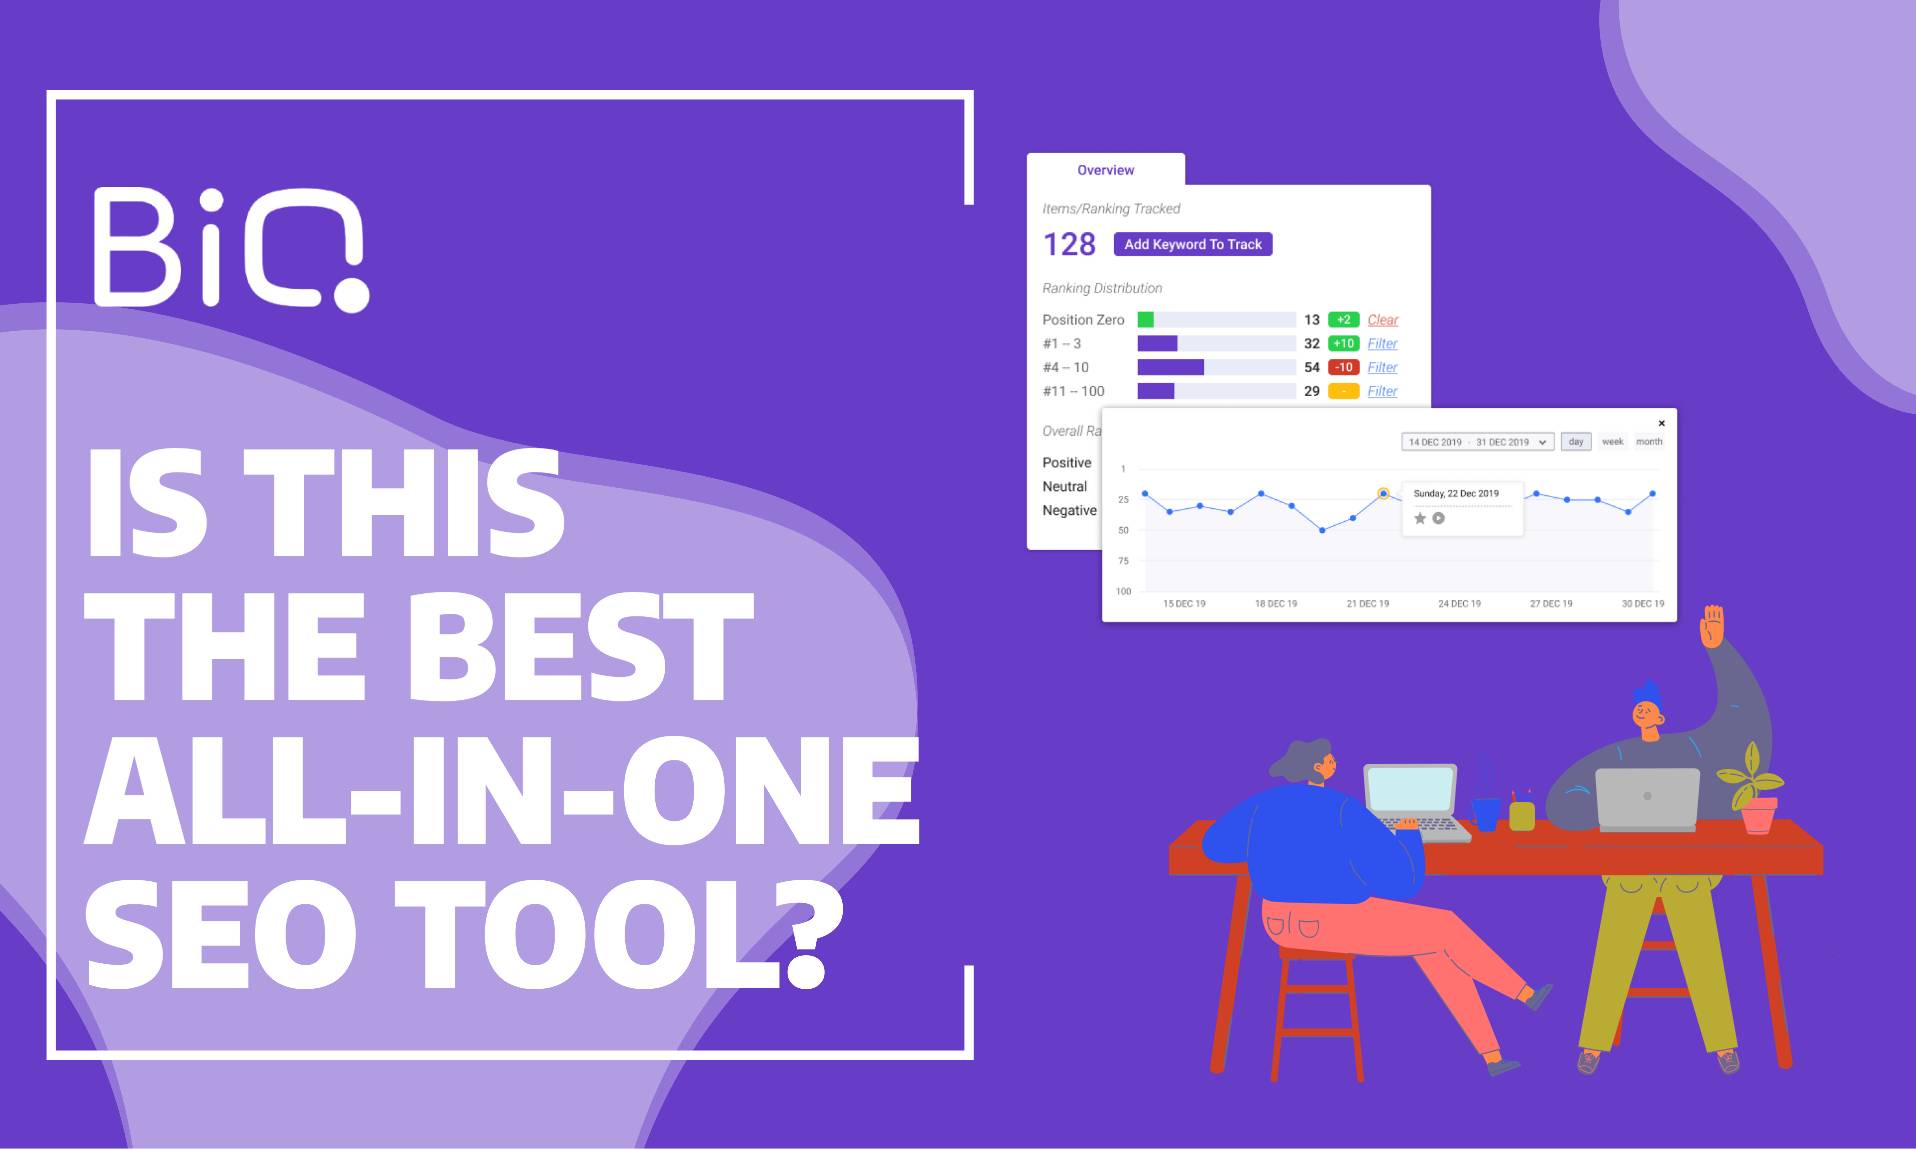 BiQ.Cloud - Is this the best all-in-one SEO tool?